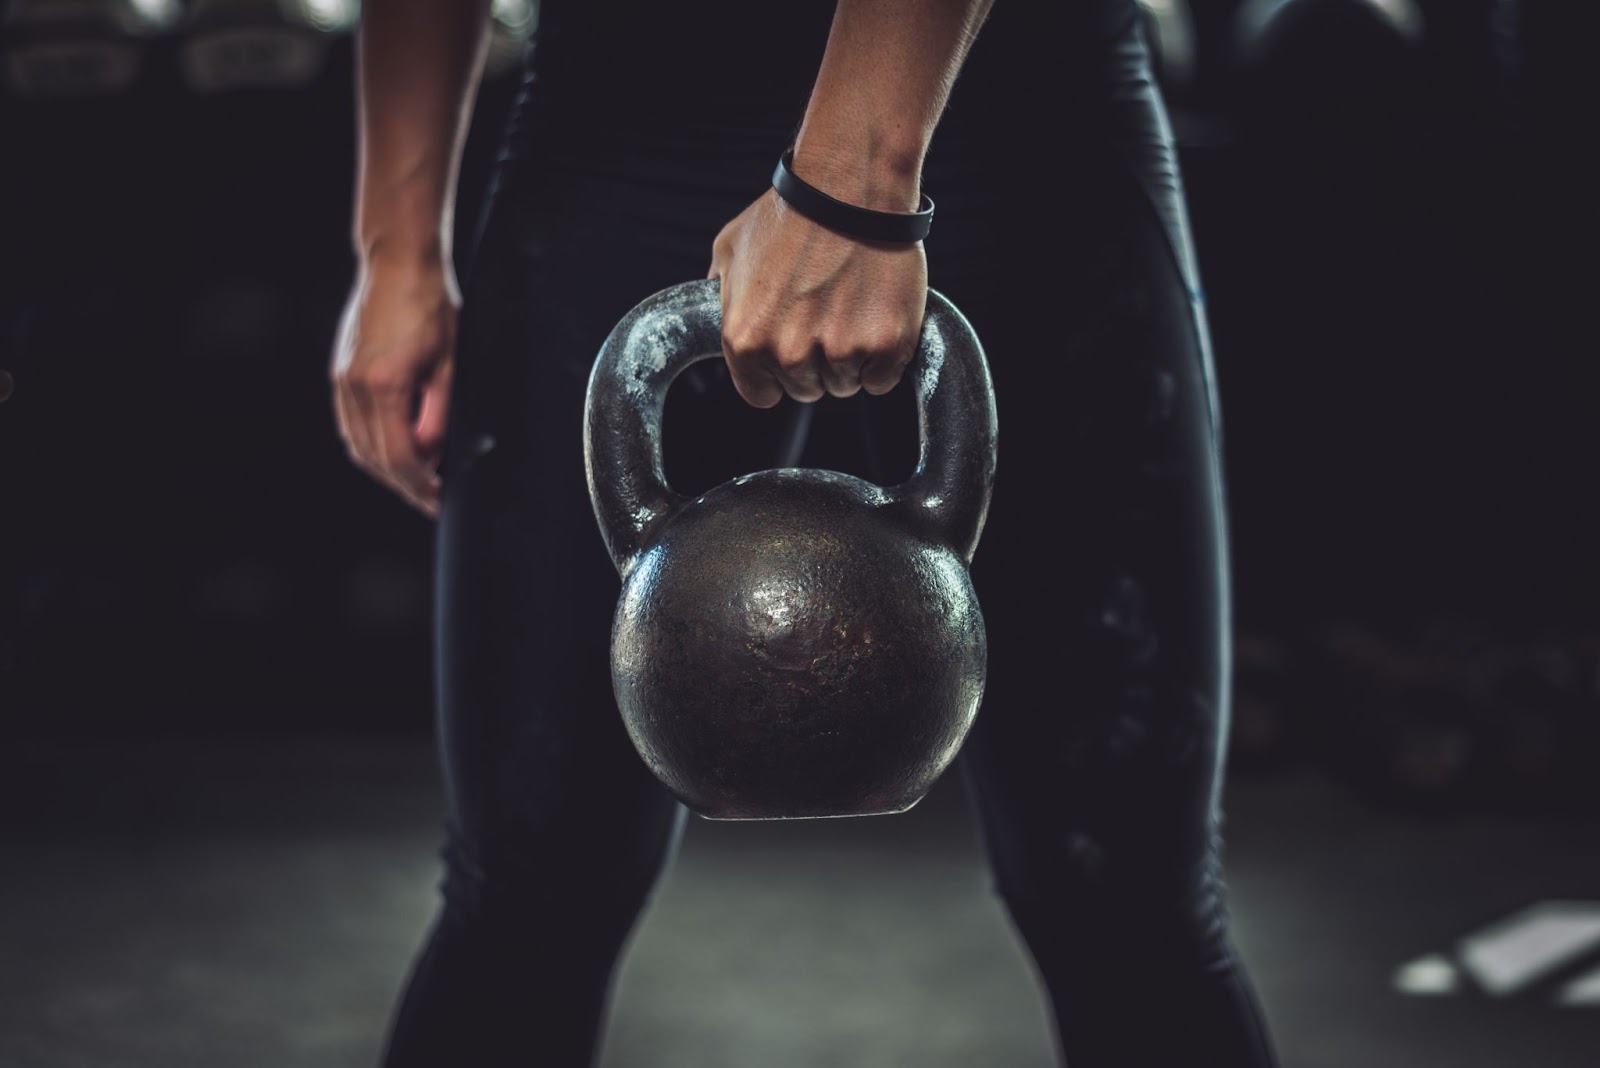 Closeup of a fit person holding a kettlebell in front of them